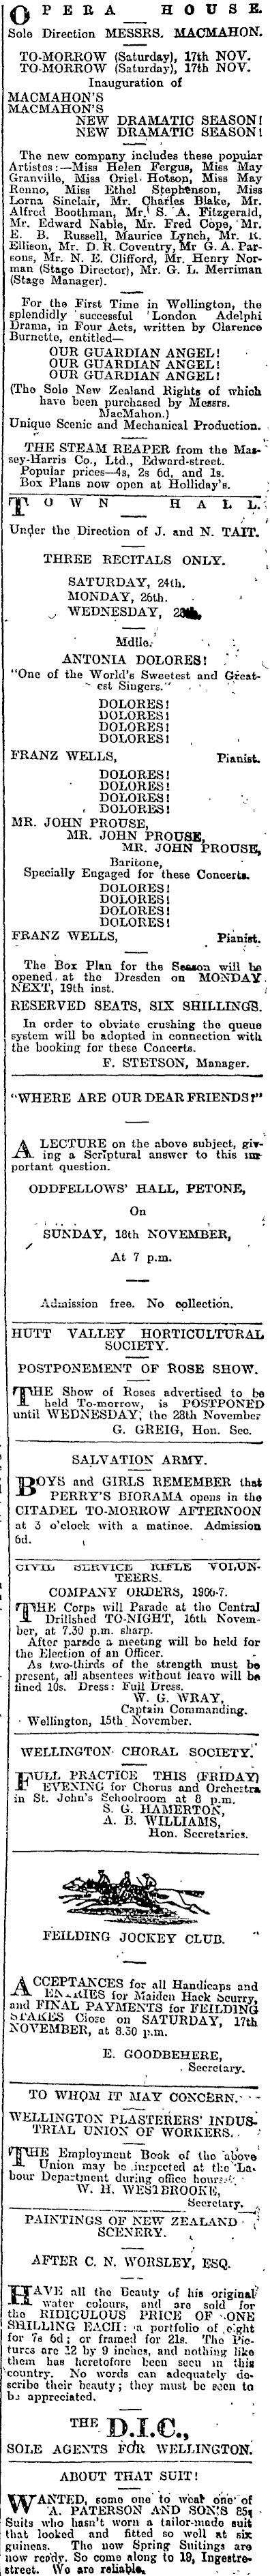 Papers Past Newspapers Evening Post 16 November 1906 Page 6 Advertisements Column 3